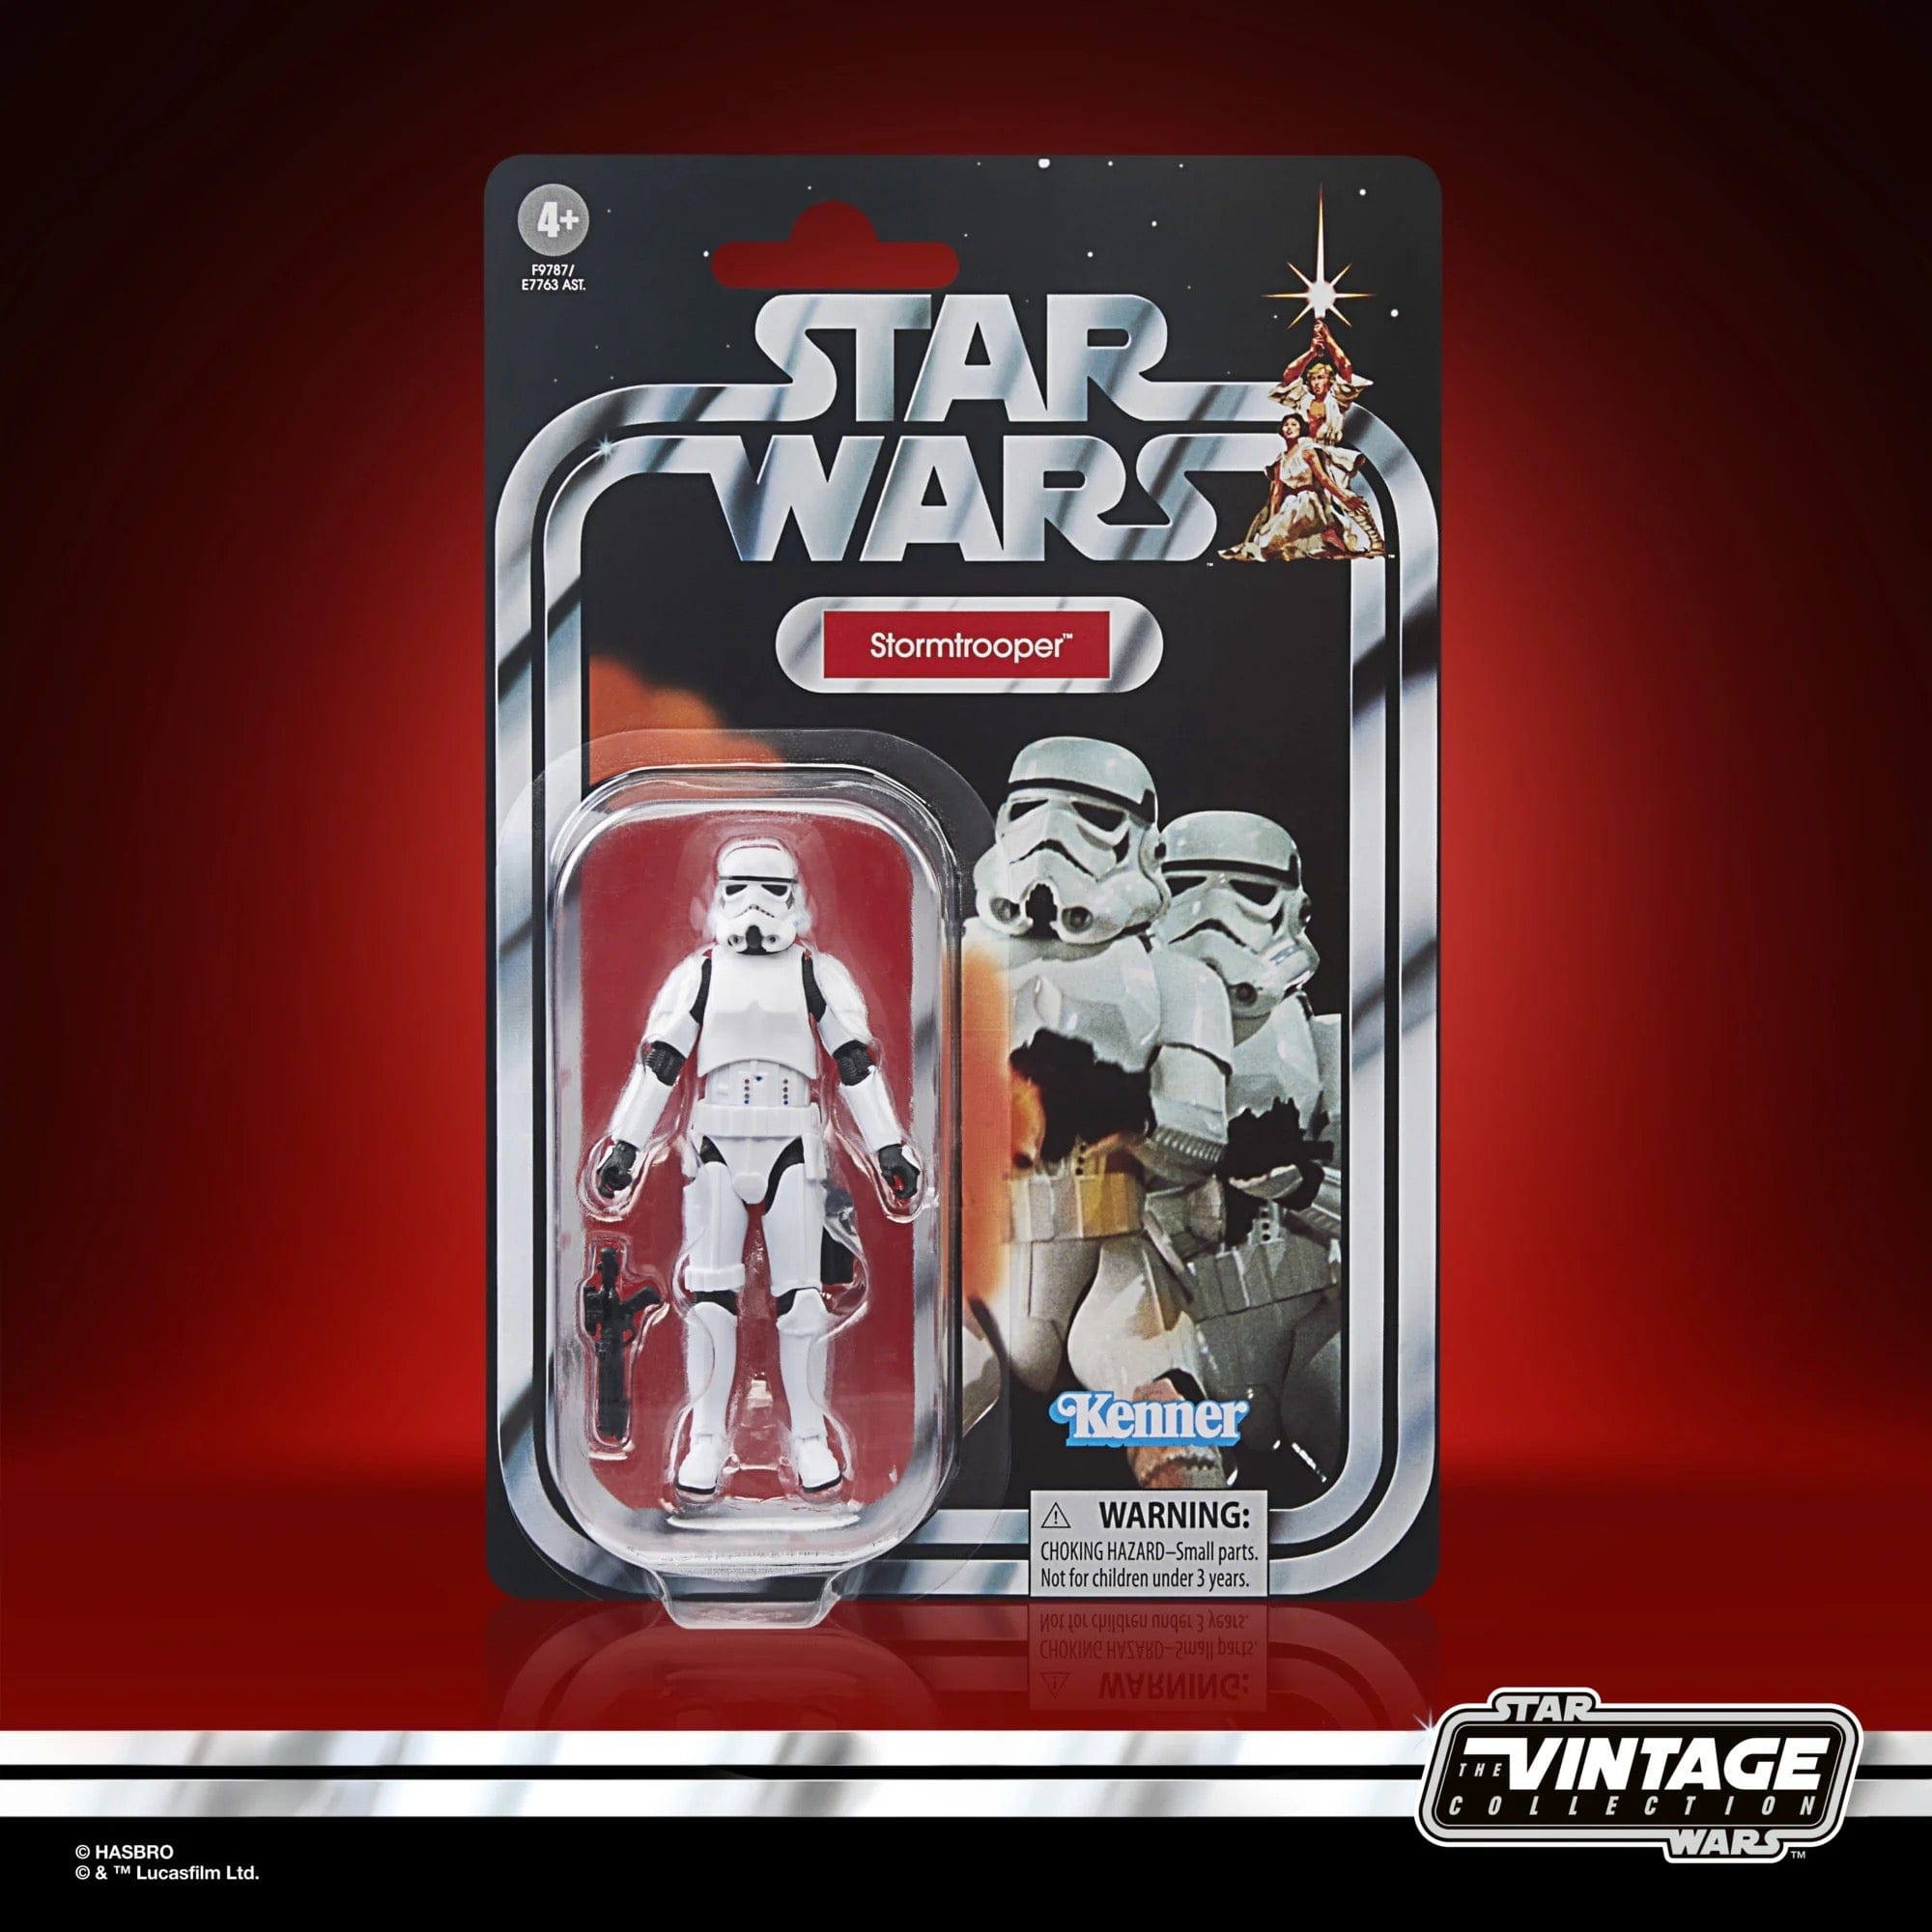 Hasbro Star Wars The Vintage Collection A New Hope Stormtrooper Action Figure